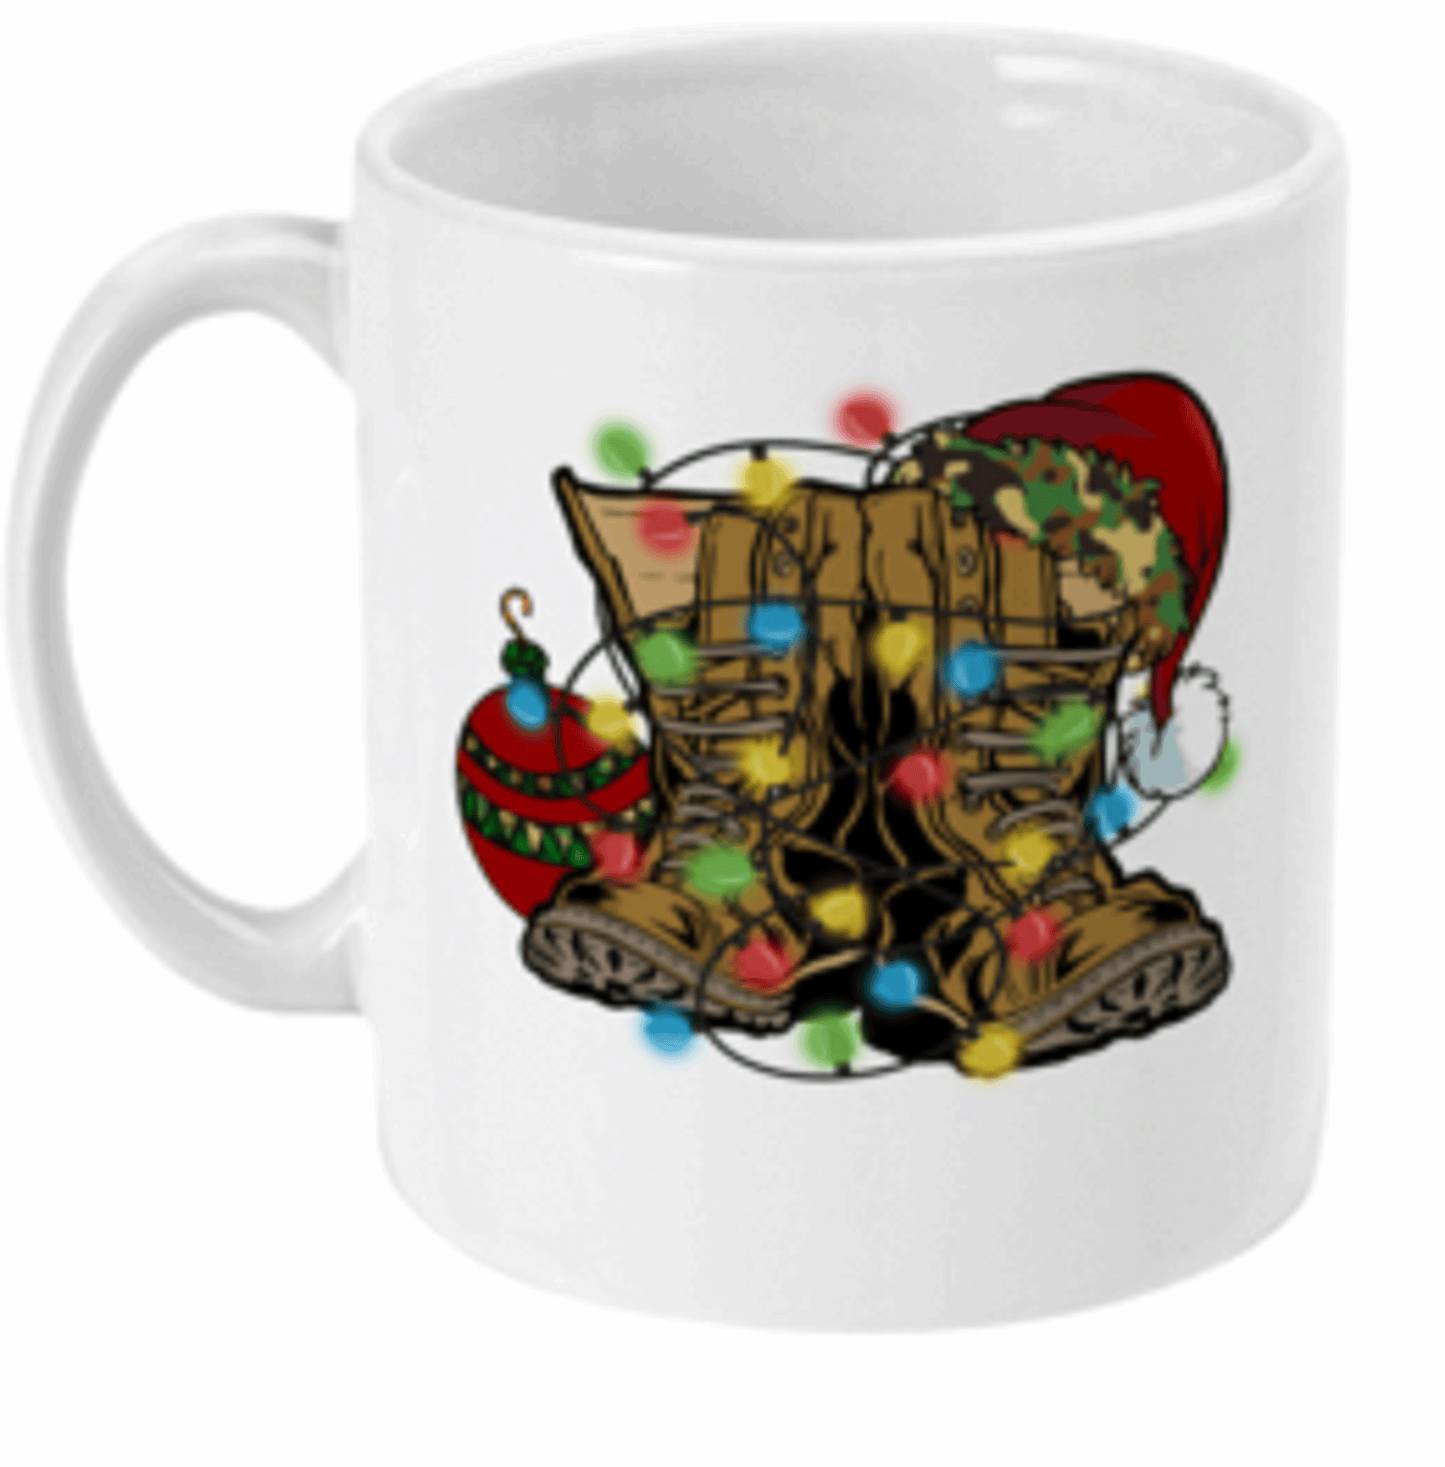  Christmas Military Boots With Decorations Coffee Mug by Free Spirit Accessories sold by Free Spirit Accessories